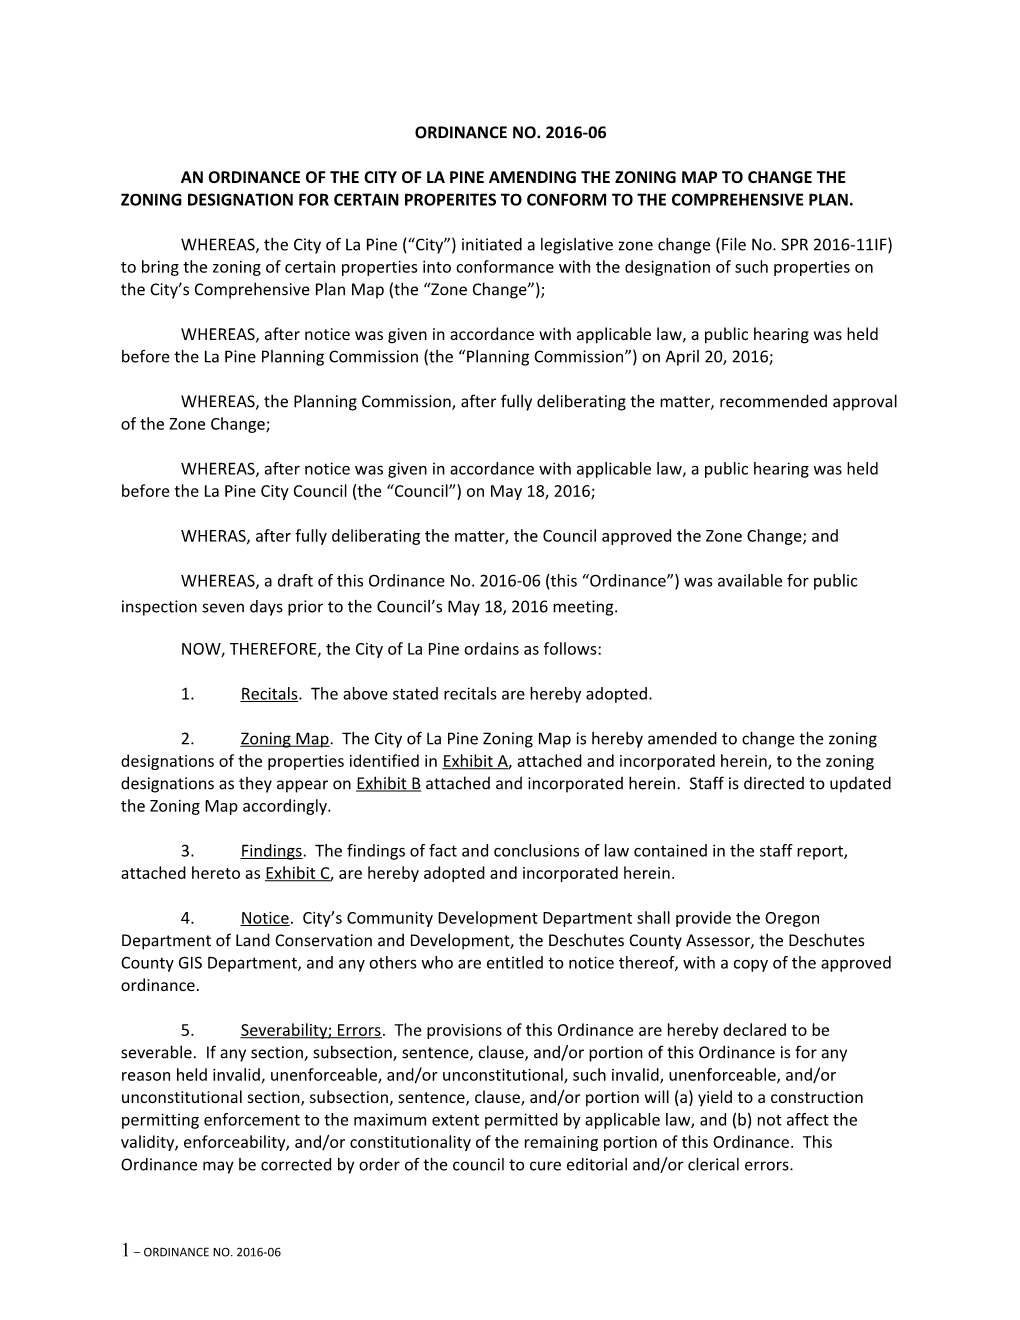 An Ordinance of the City of La Pine Amending the Zoning Map to Change the Zoning Designation